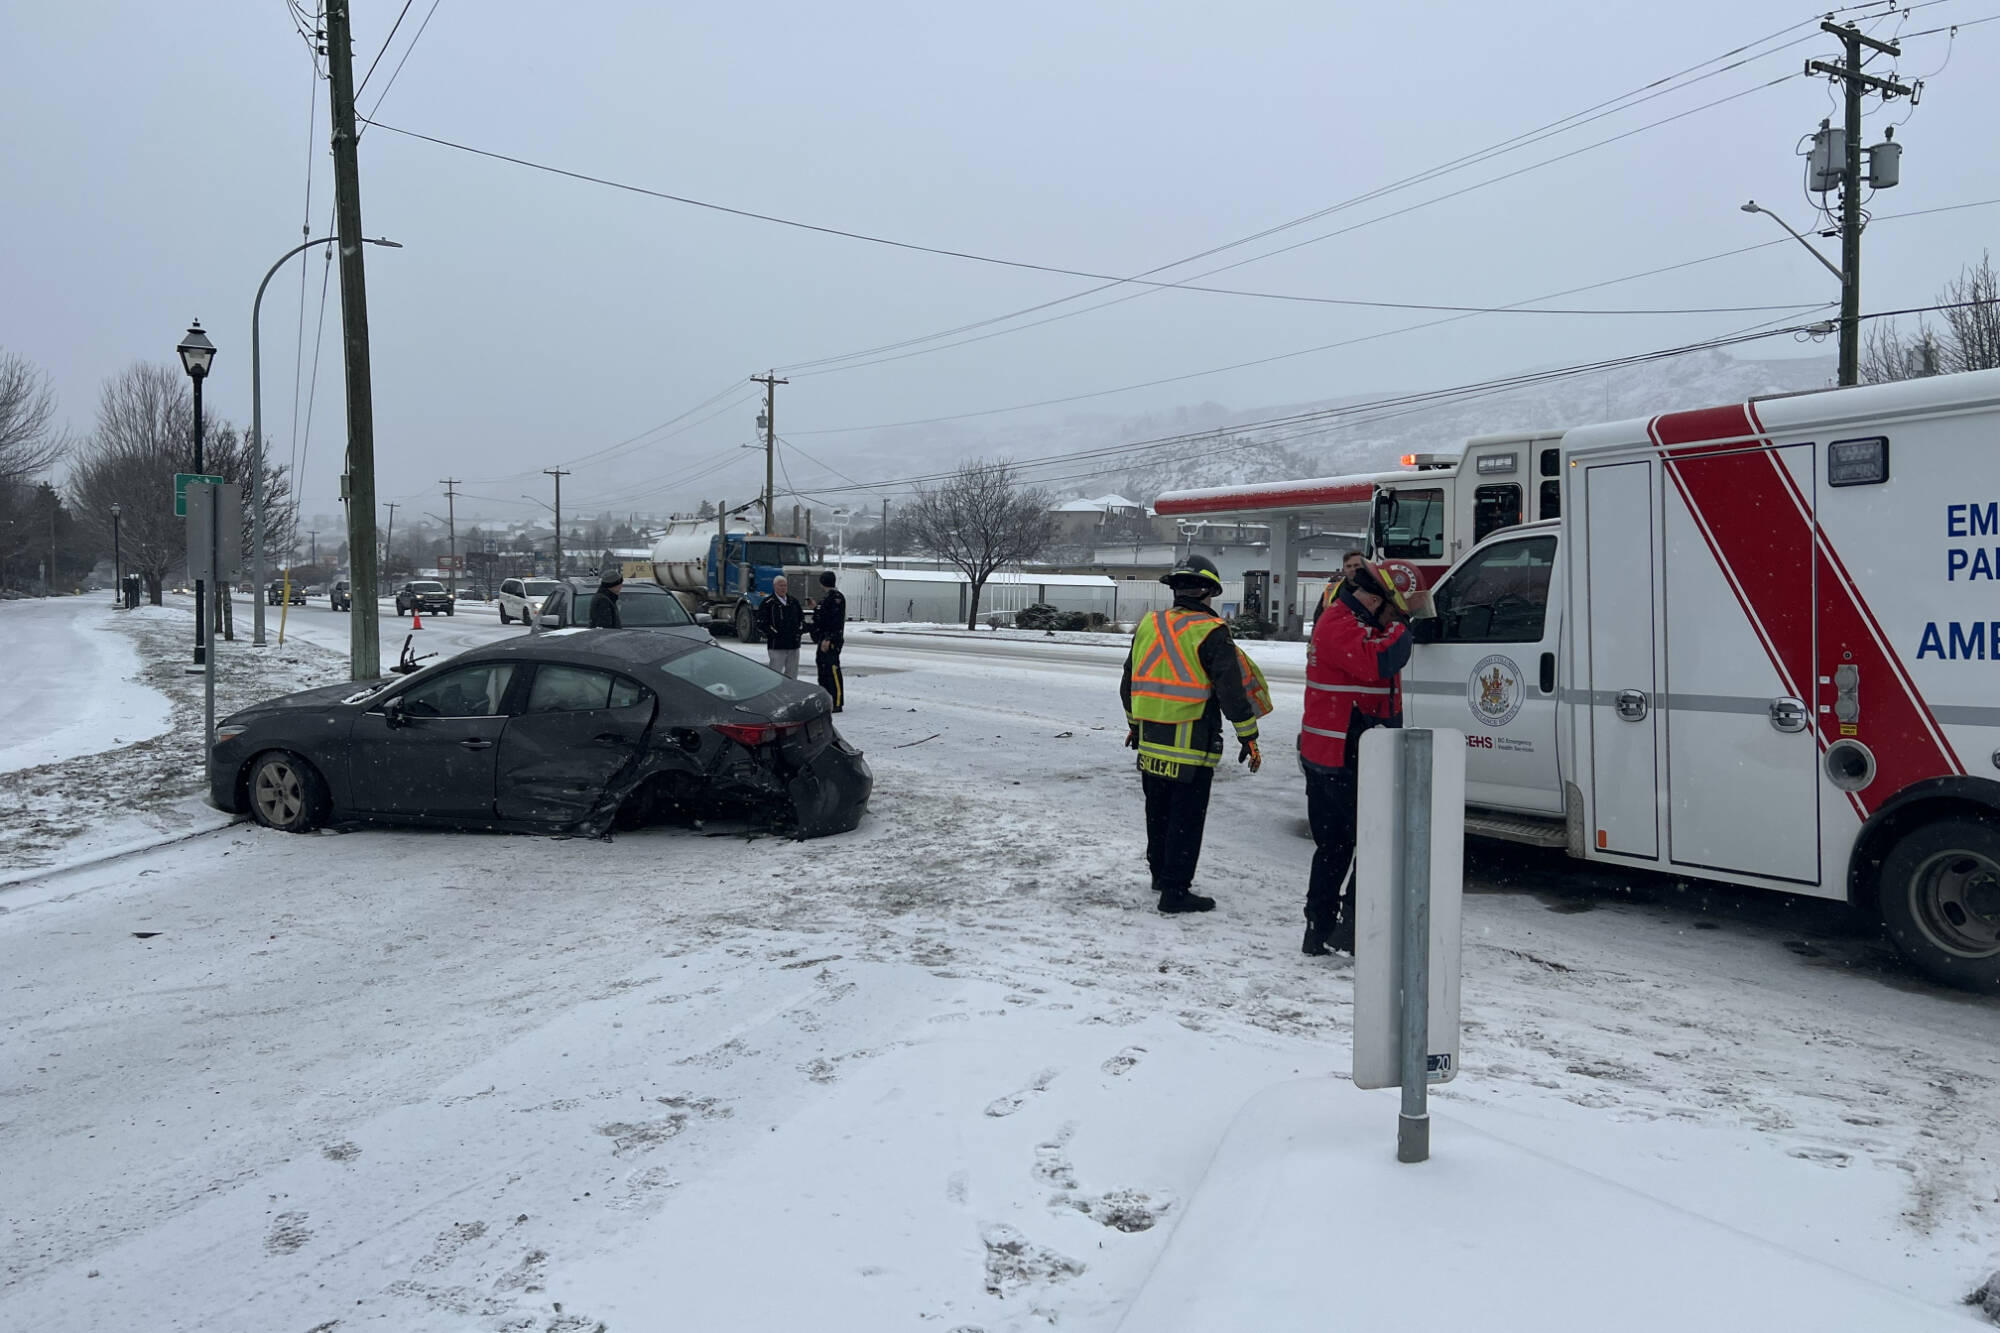 A crash has slowed traffic near the intersection of 25th Avenue and 43rd Street in Vernon Wednesday, Feb. 1, 2023. (Brendan Shykora - Morning Star)